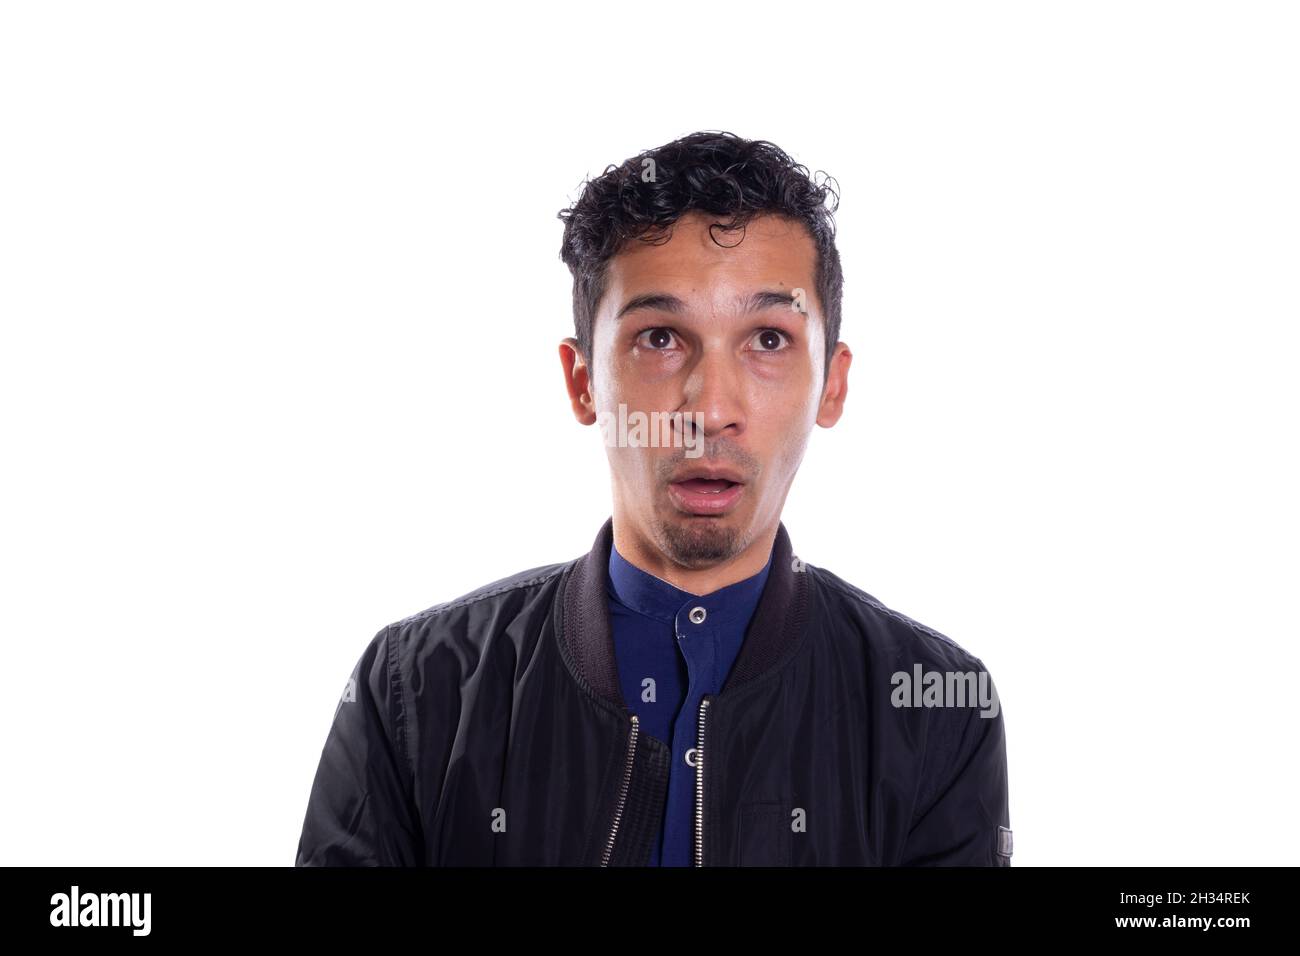 Man with idiot face isolated on white background. Young adult making silly face. Stupid face theater. Stock Photo